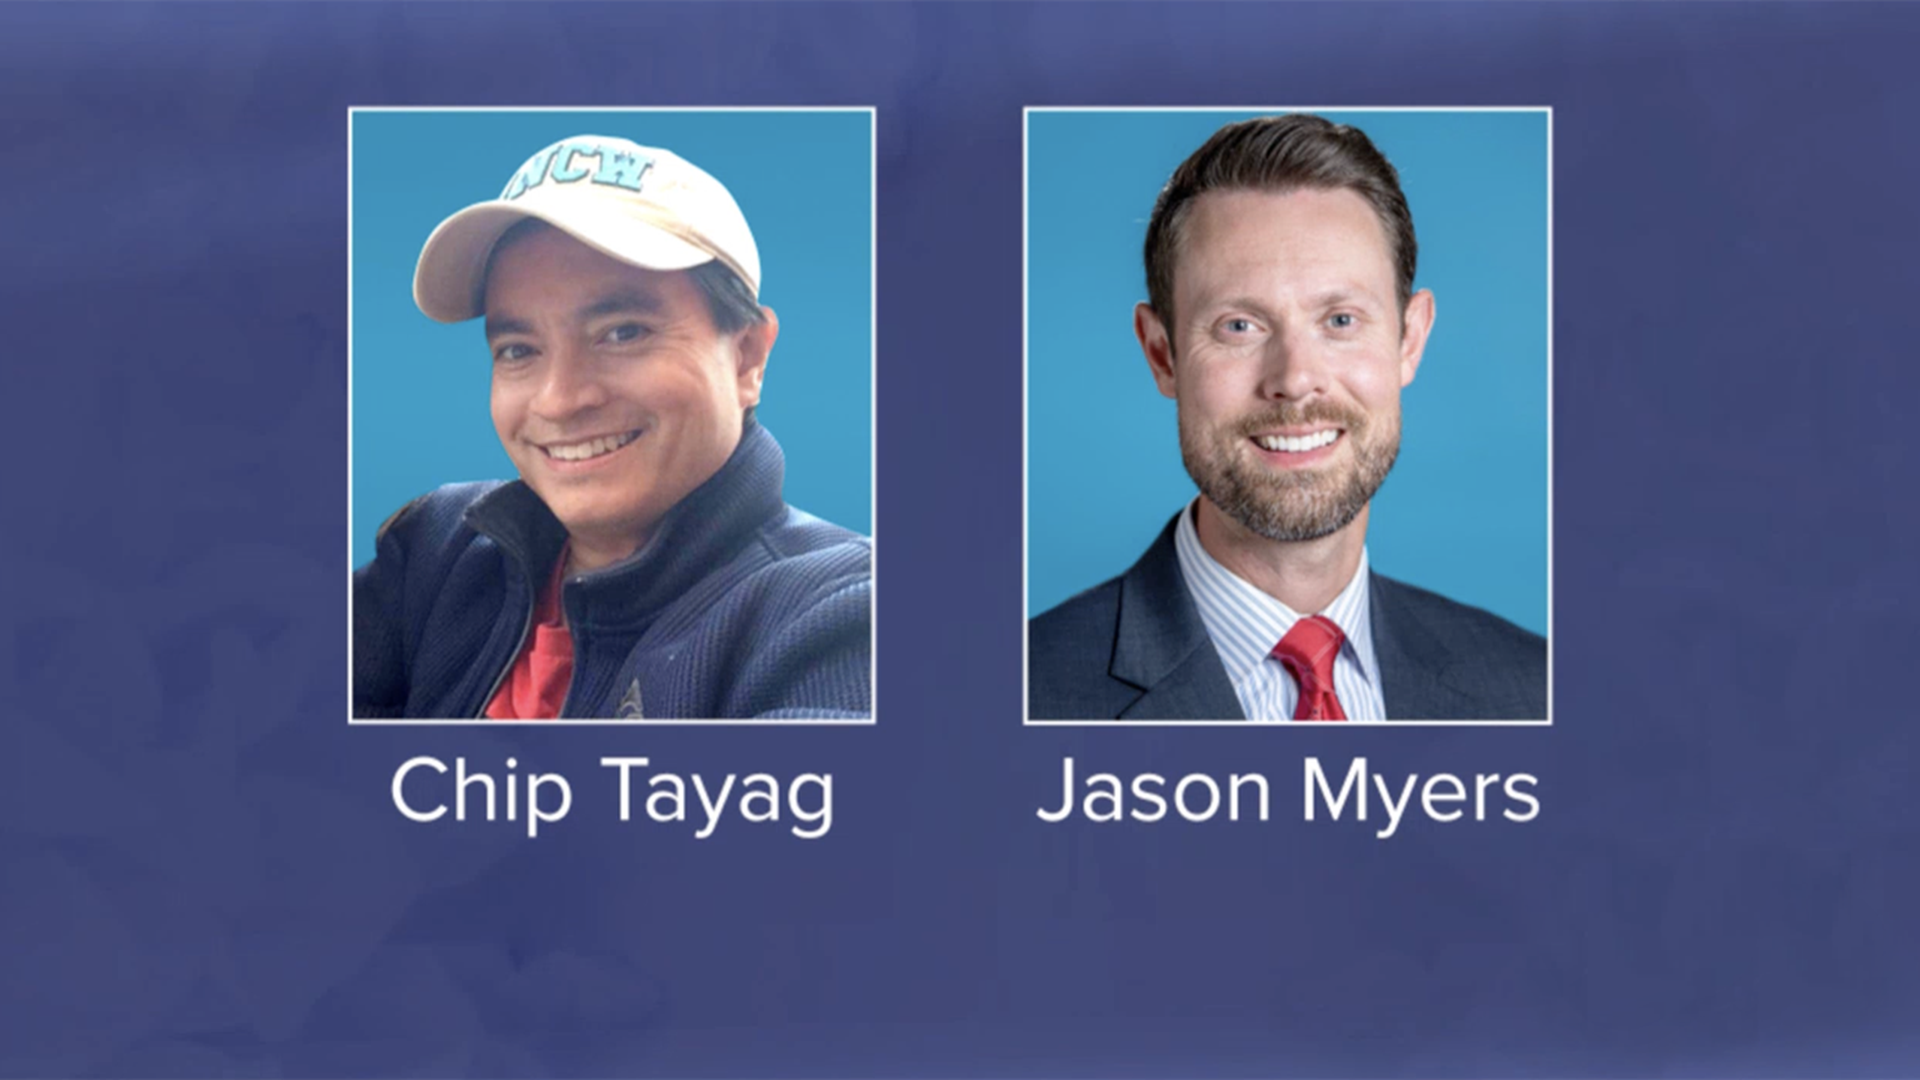 Two headshots of two men with their names underneath Chip Tayag and Jason Myers